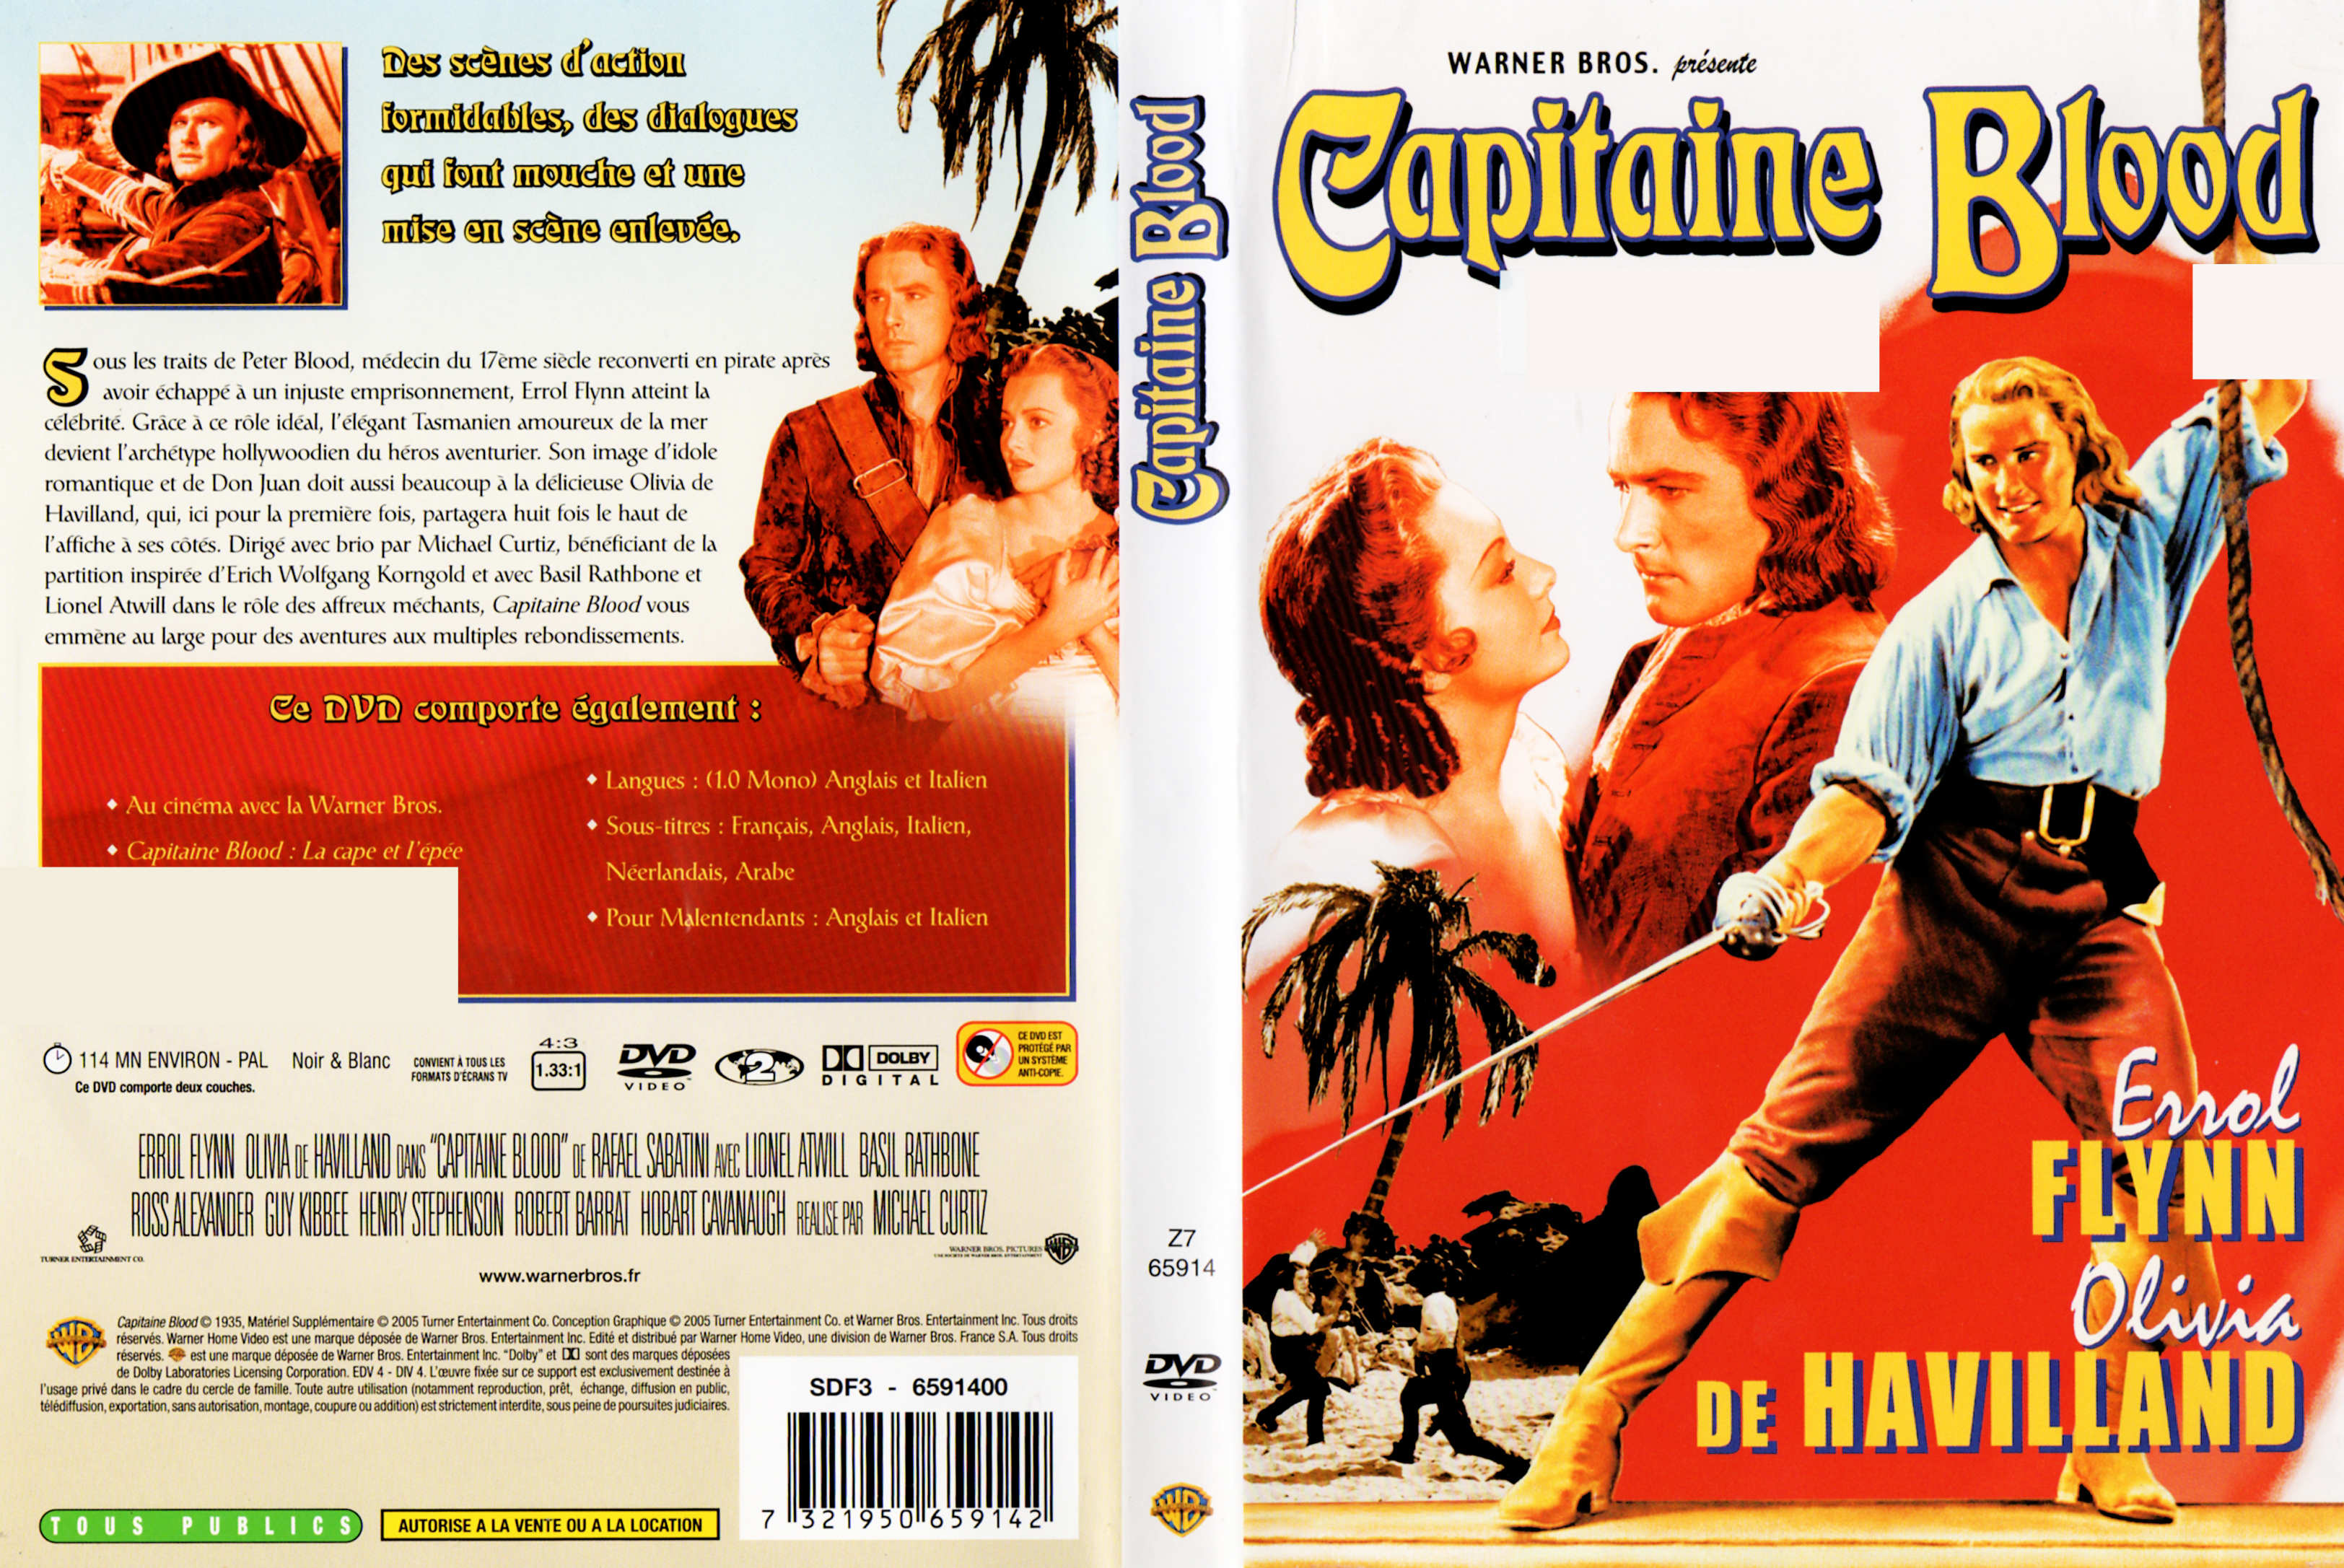 Jaquette DVD Capitaine Blood